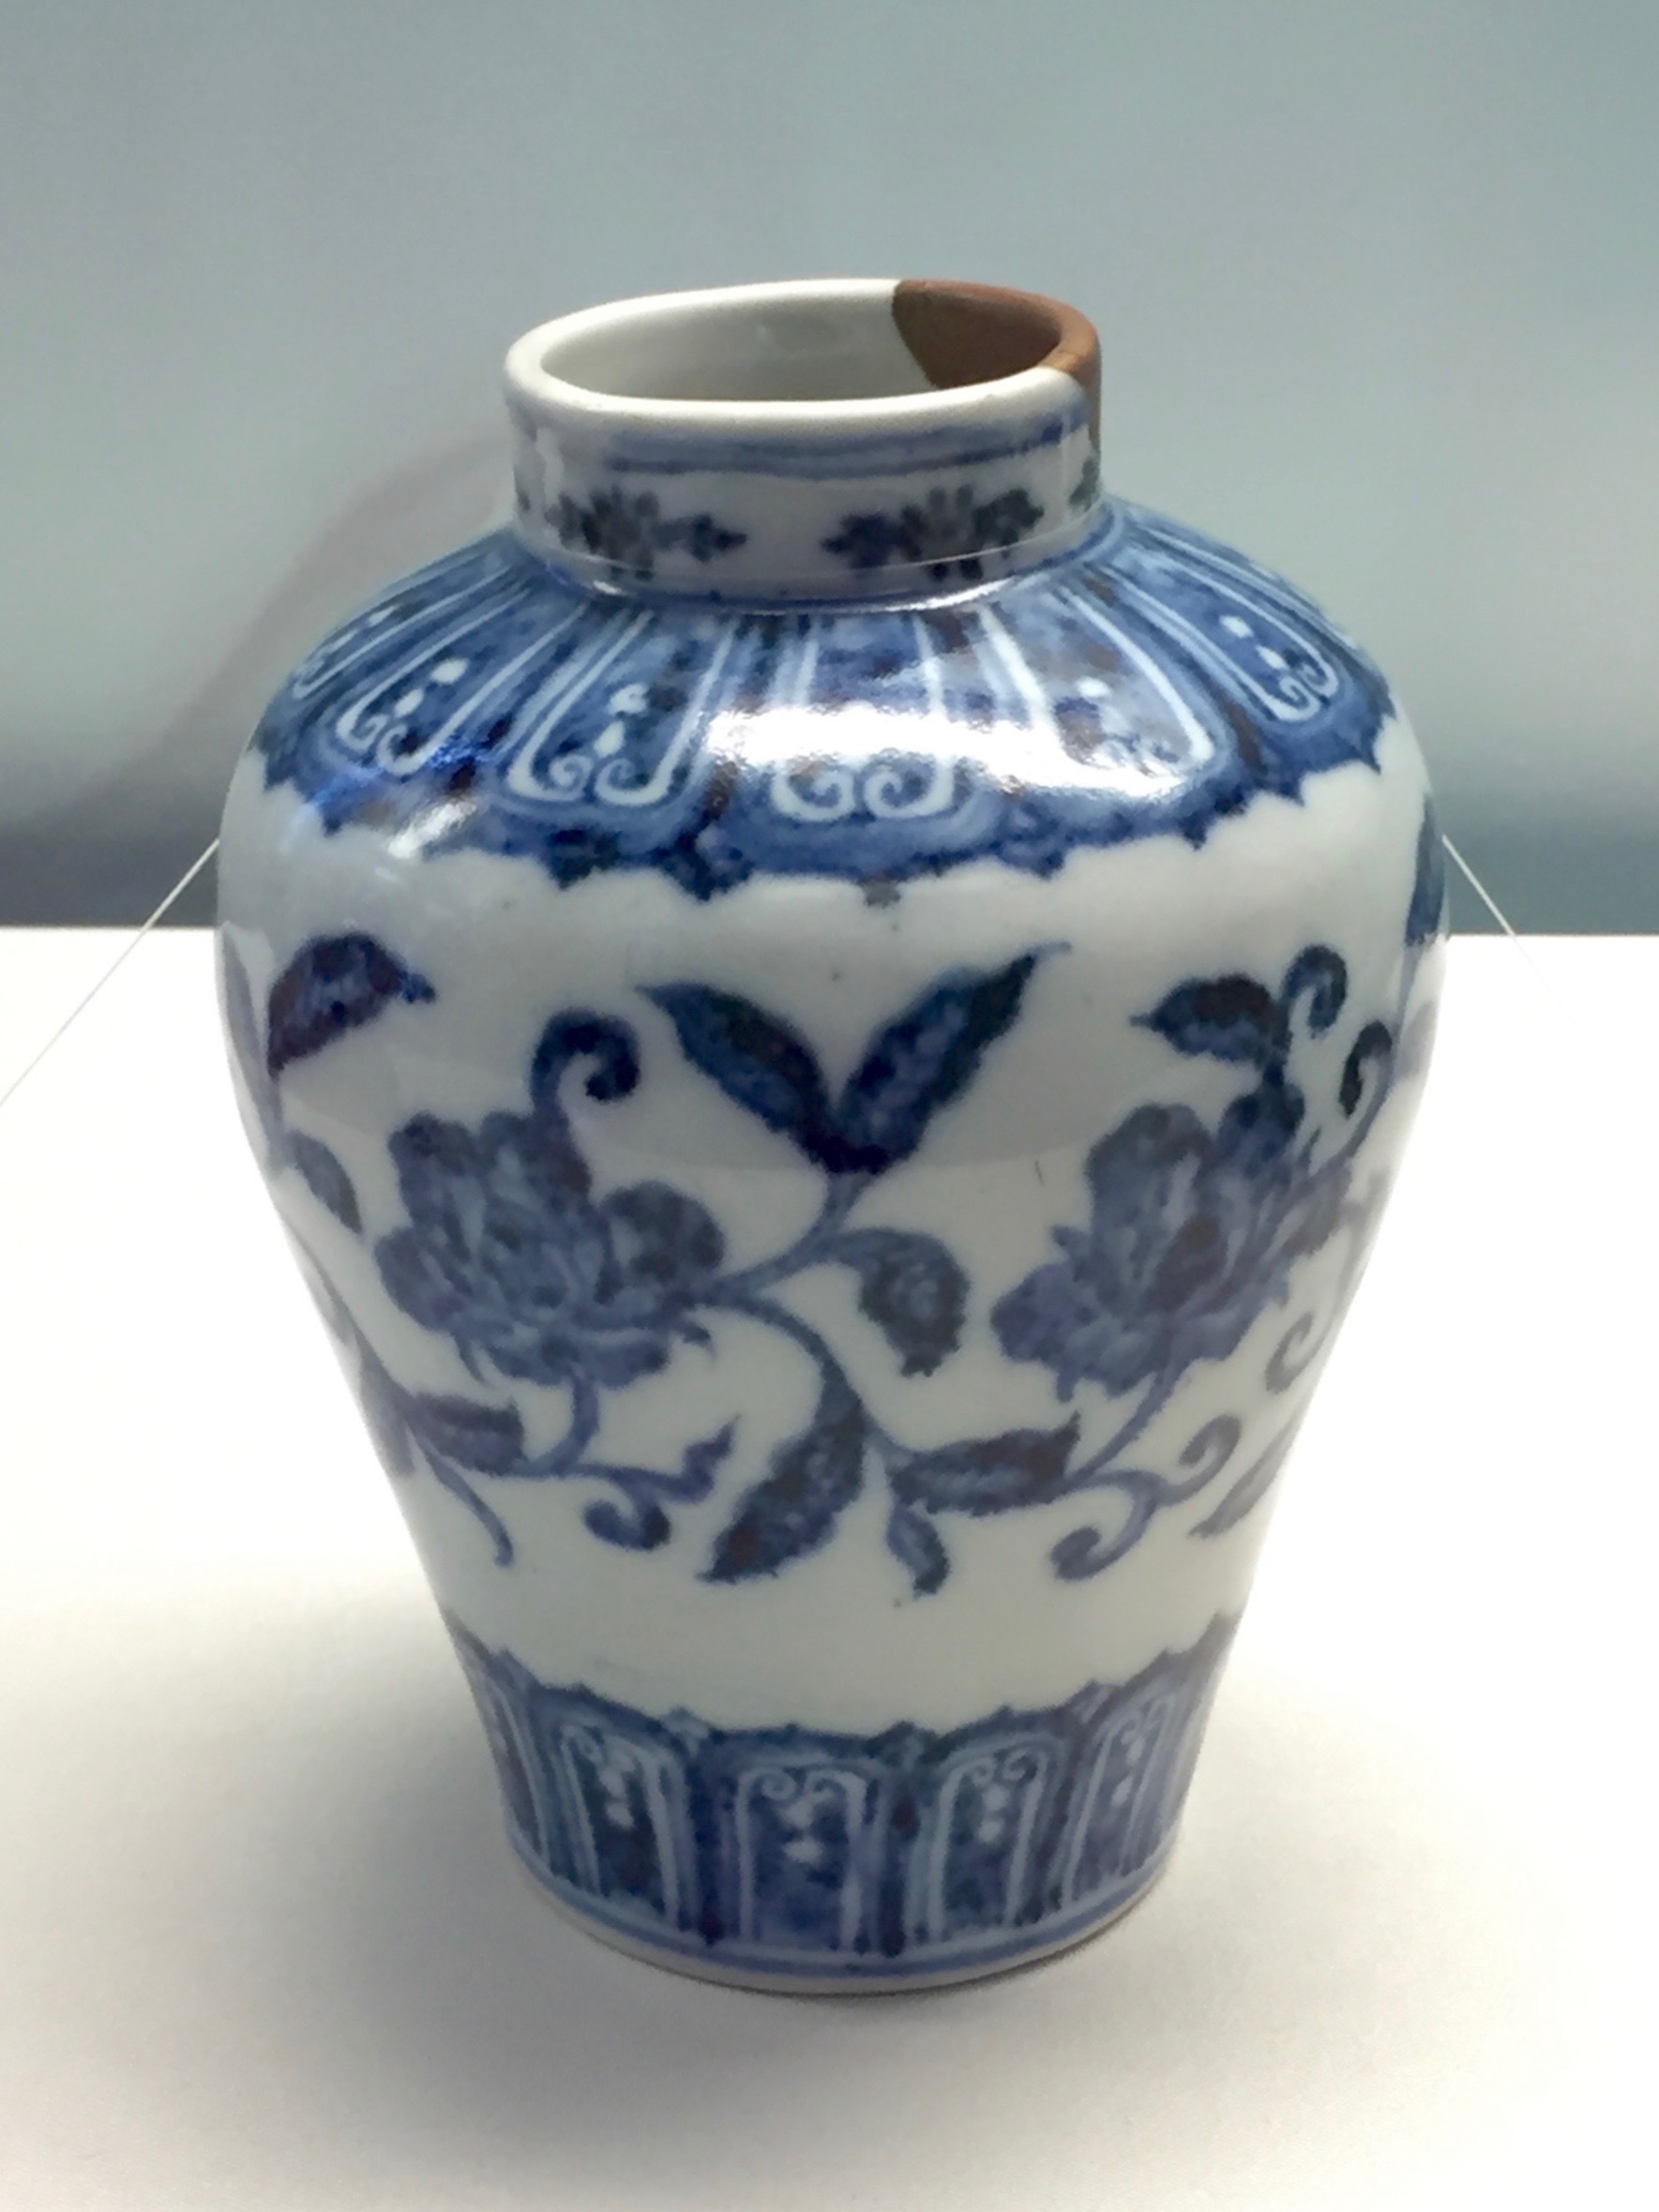  Blue and White Jar  Xuande Emperor's Reign (1426-1435), Ming Dynasty 